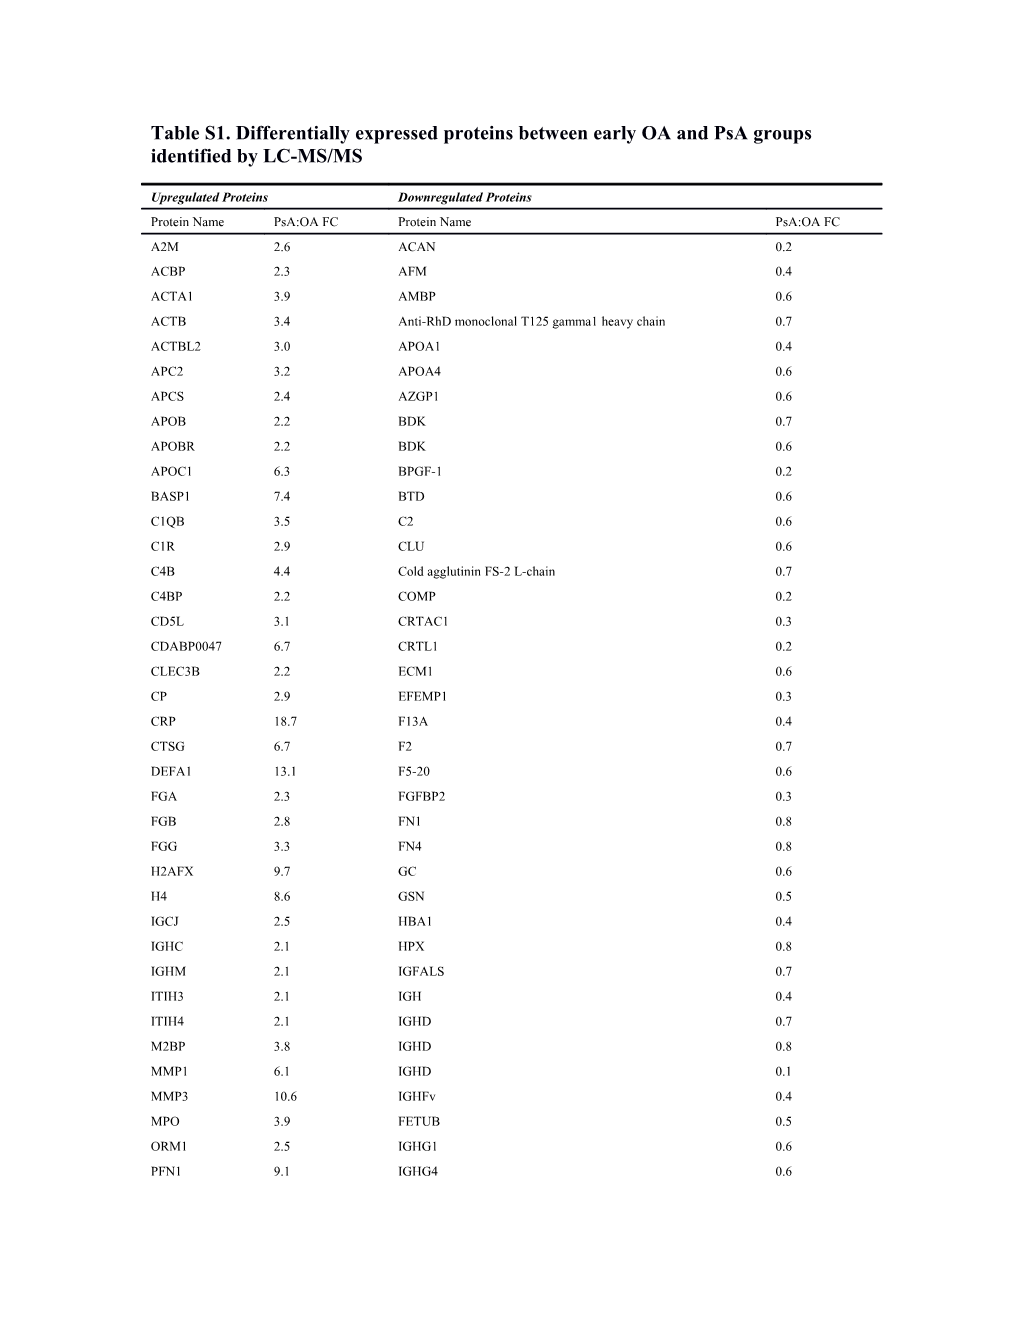 Table S1. Differentially Expressed Proteins Between Early OA and Psa Groups Identified